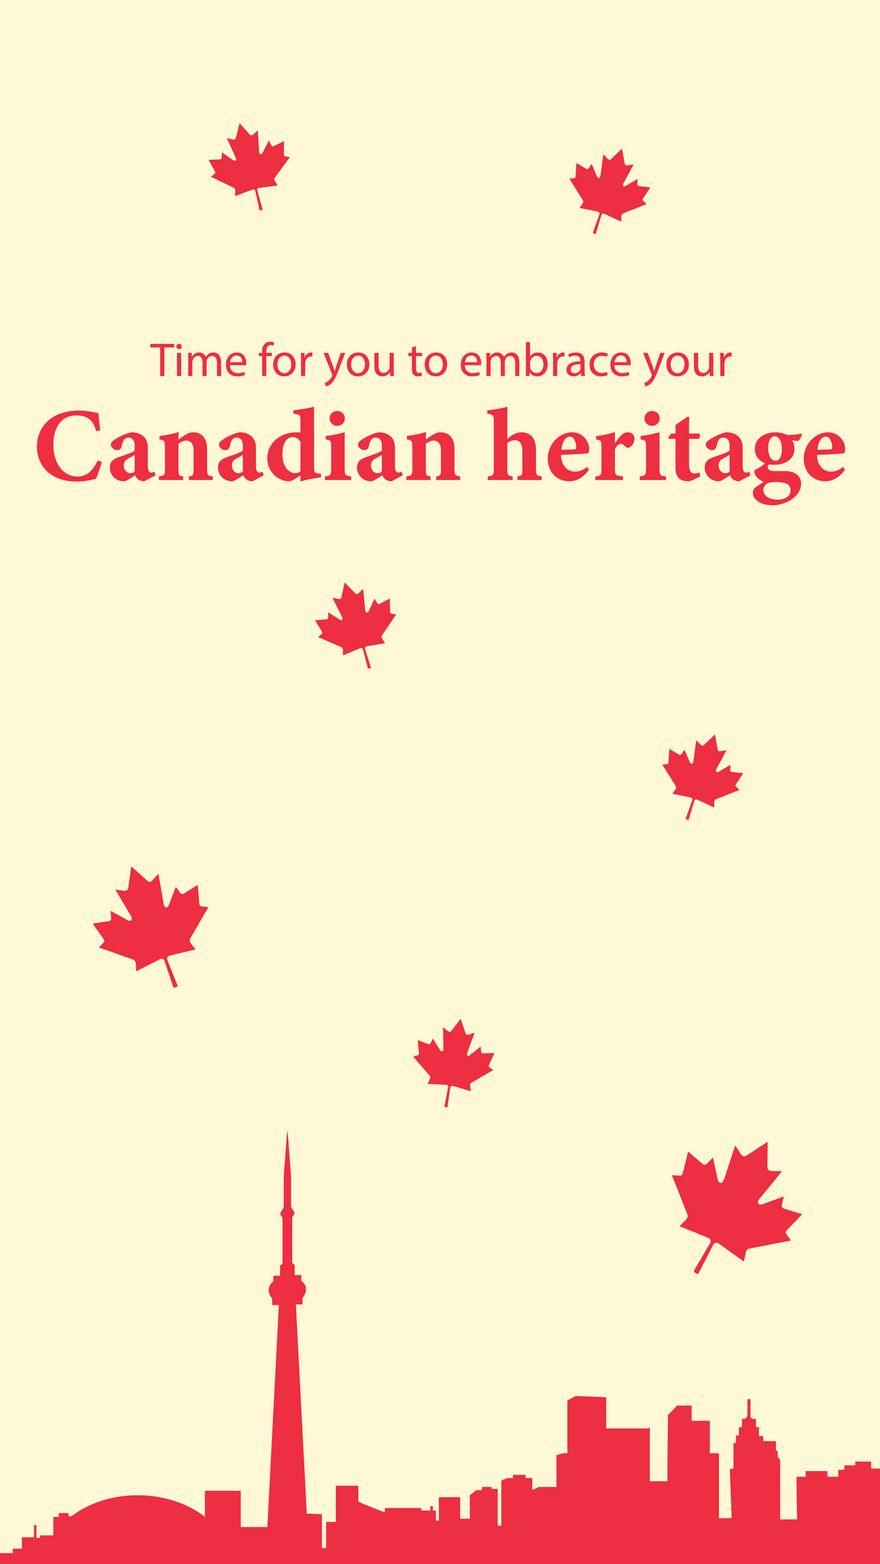 Canada Day Greeting Card Background